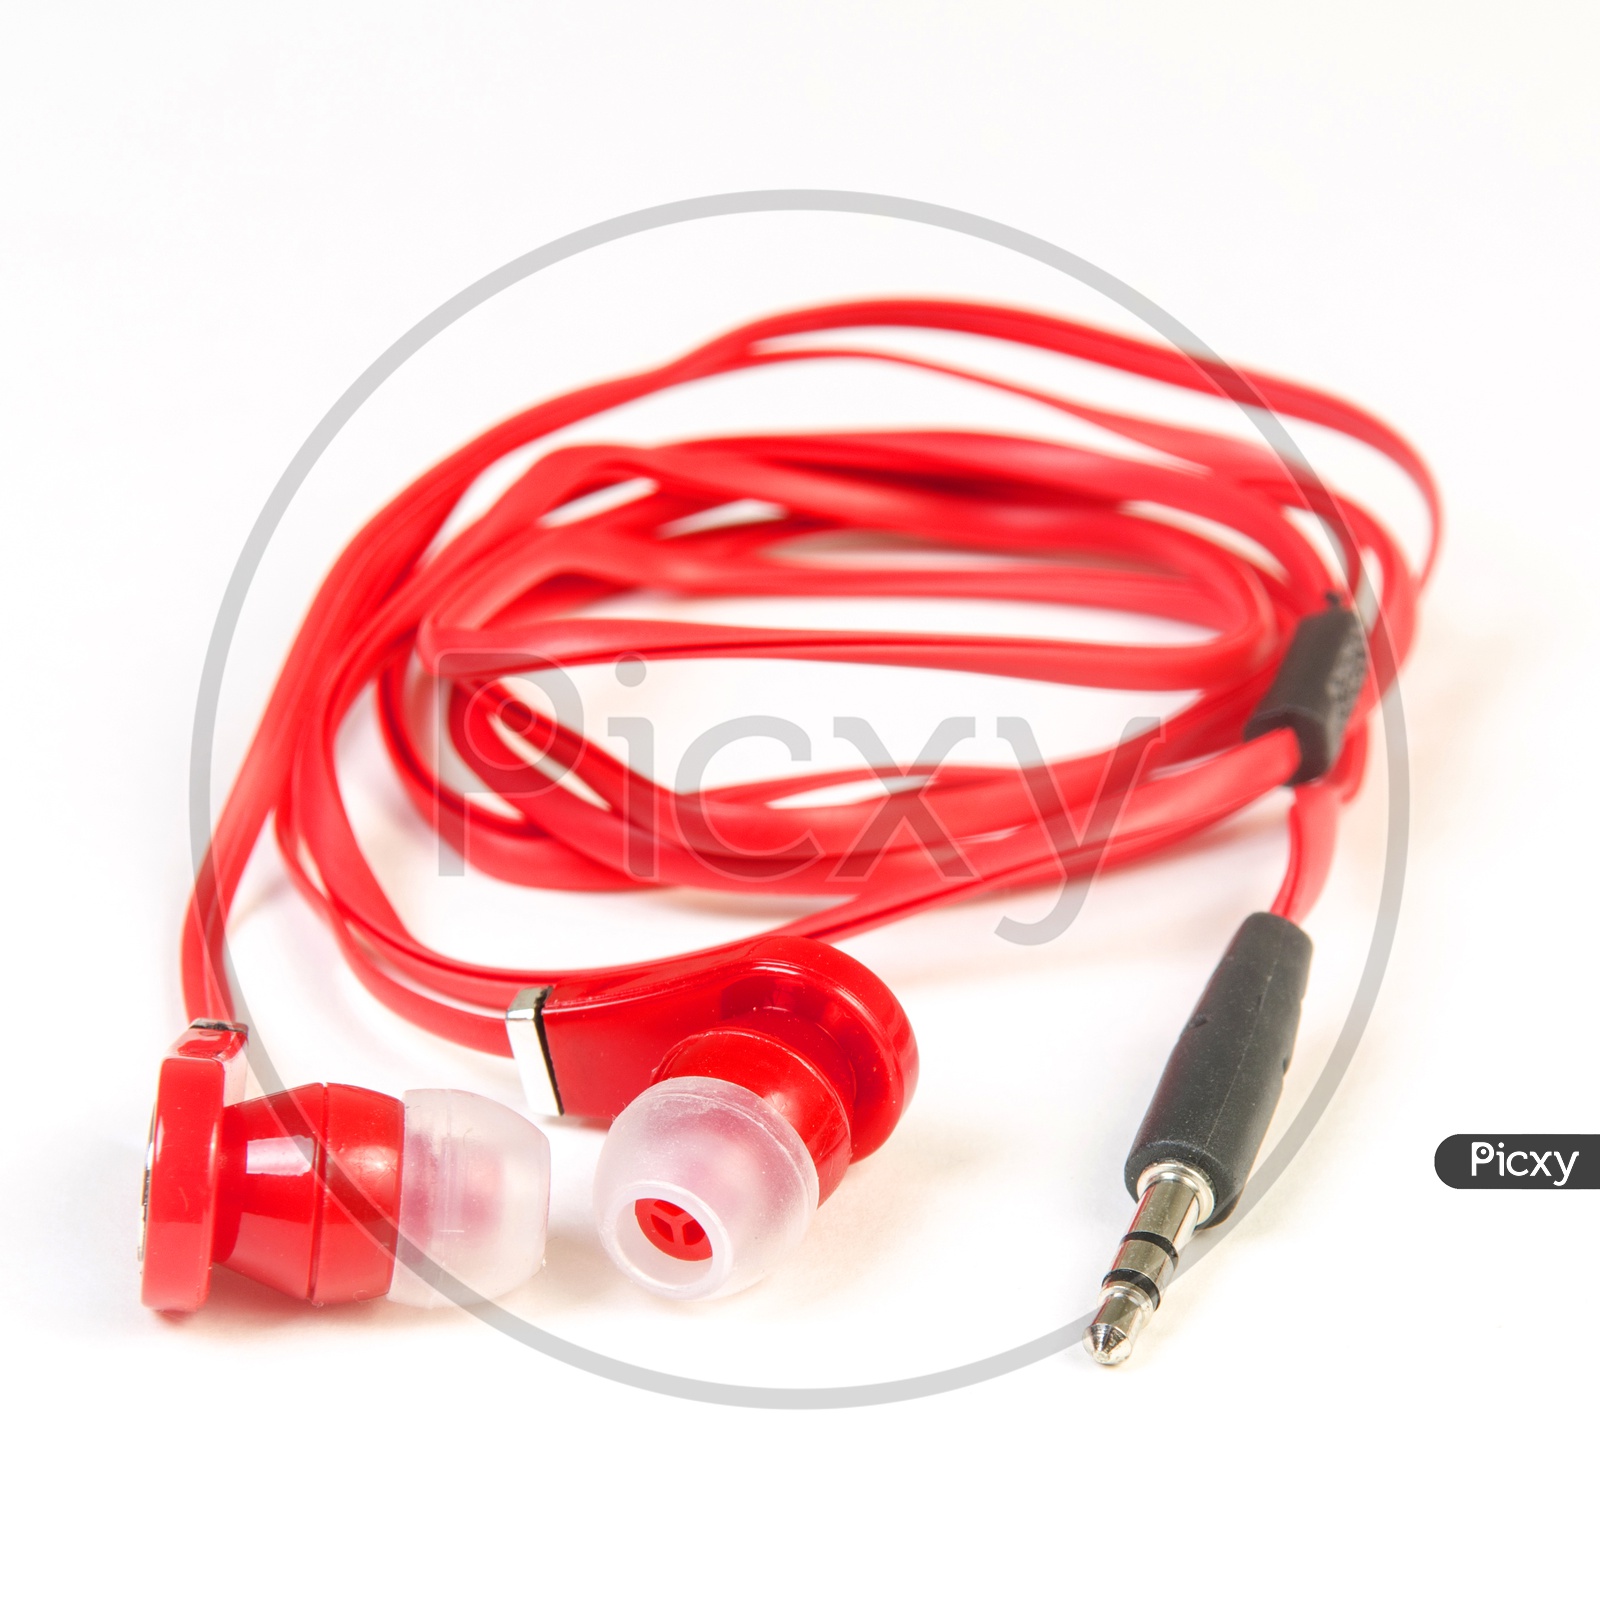 Modern portable audio earphones isolated on a white background